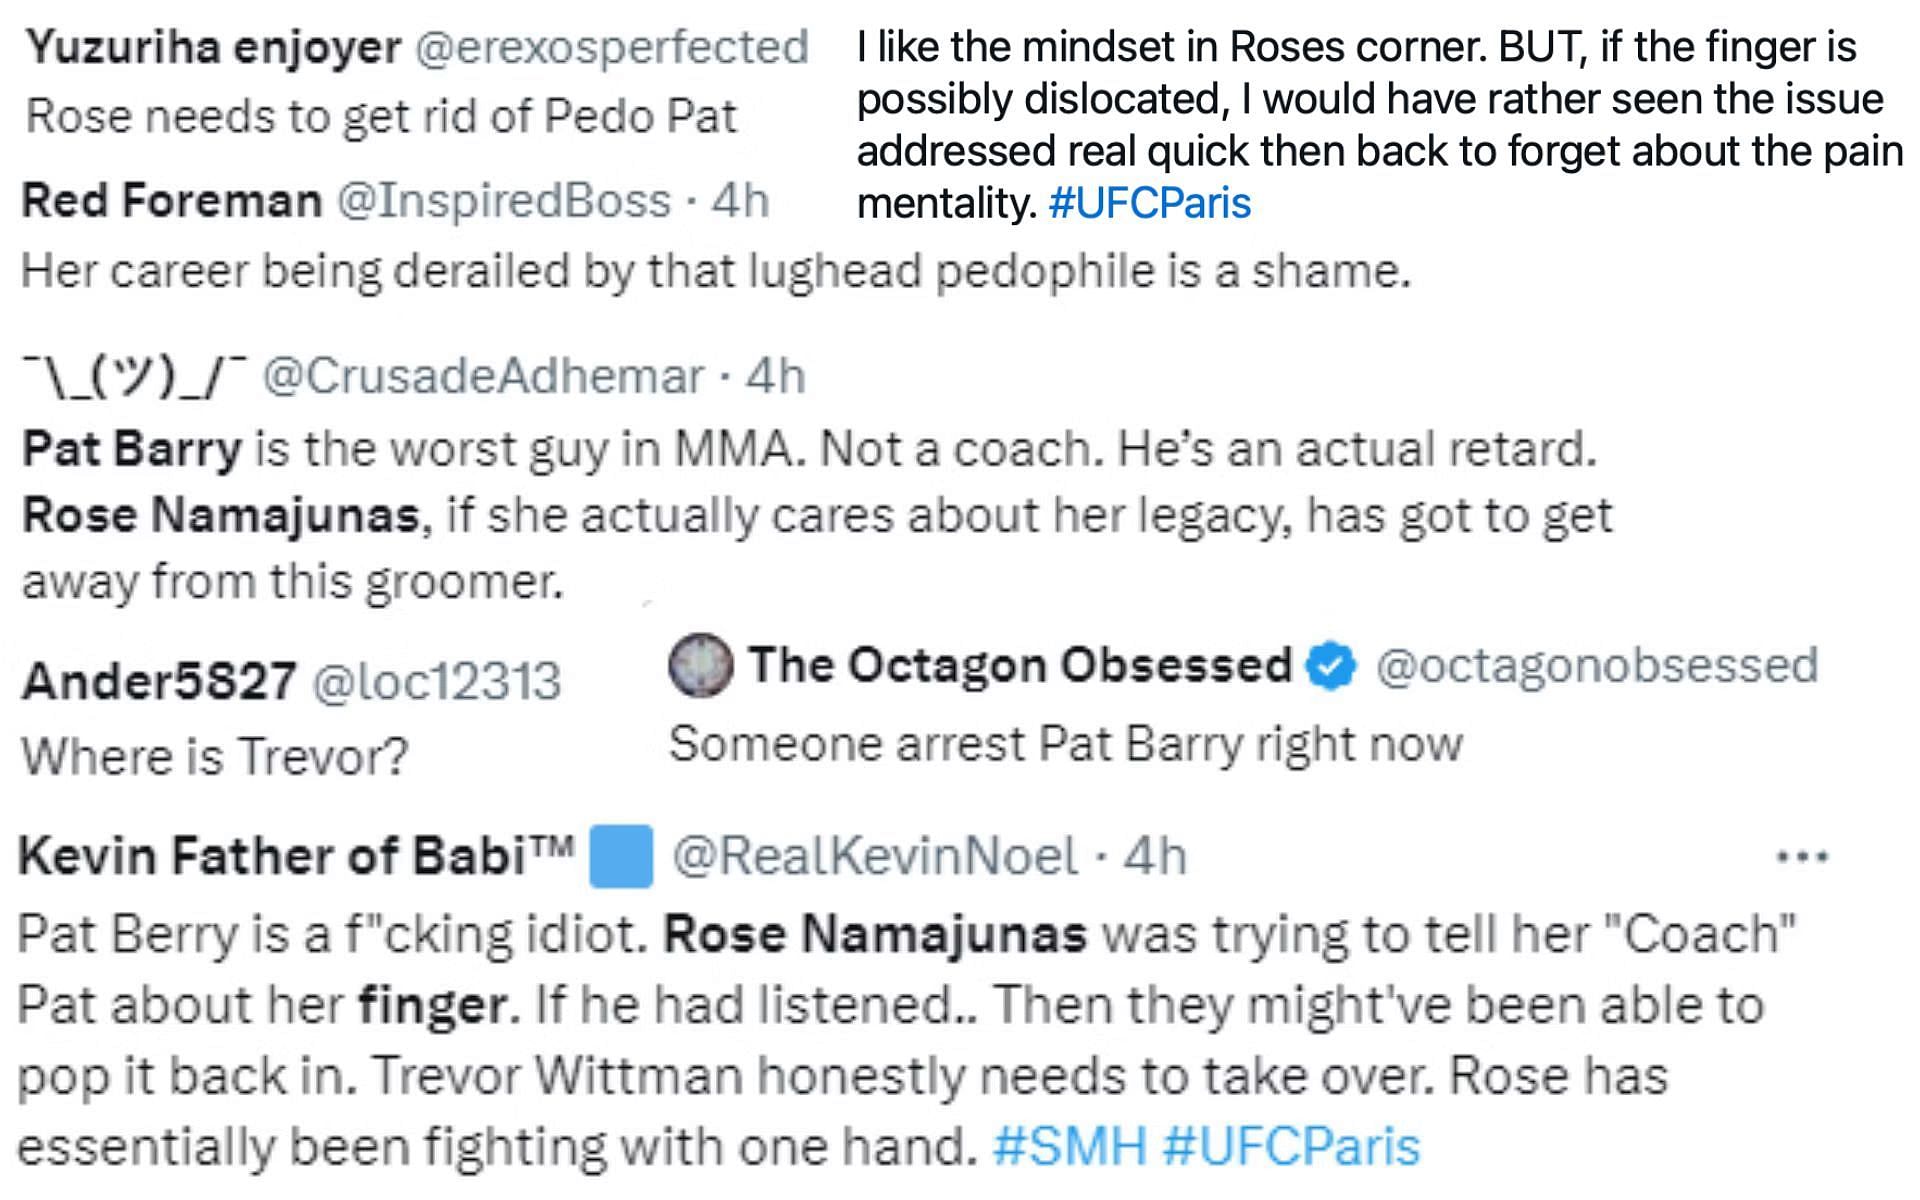 Fans react on Twitter to Rose Namajunas&#039; broken finger and her relationship with Pat Barry.